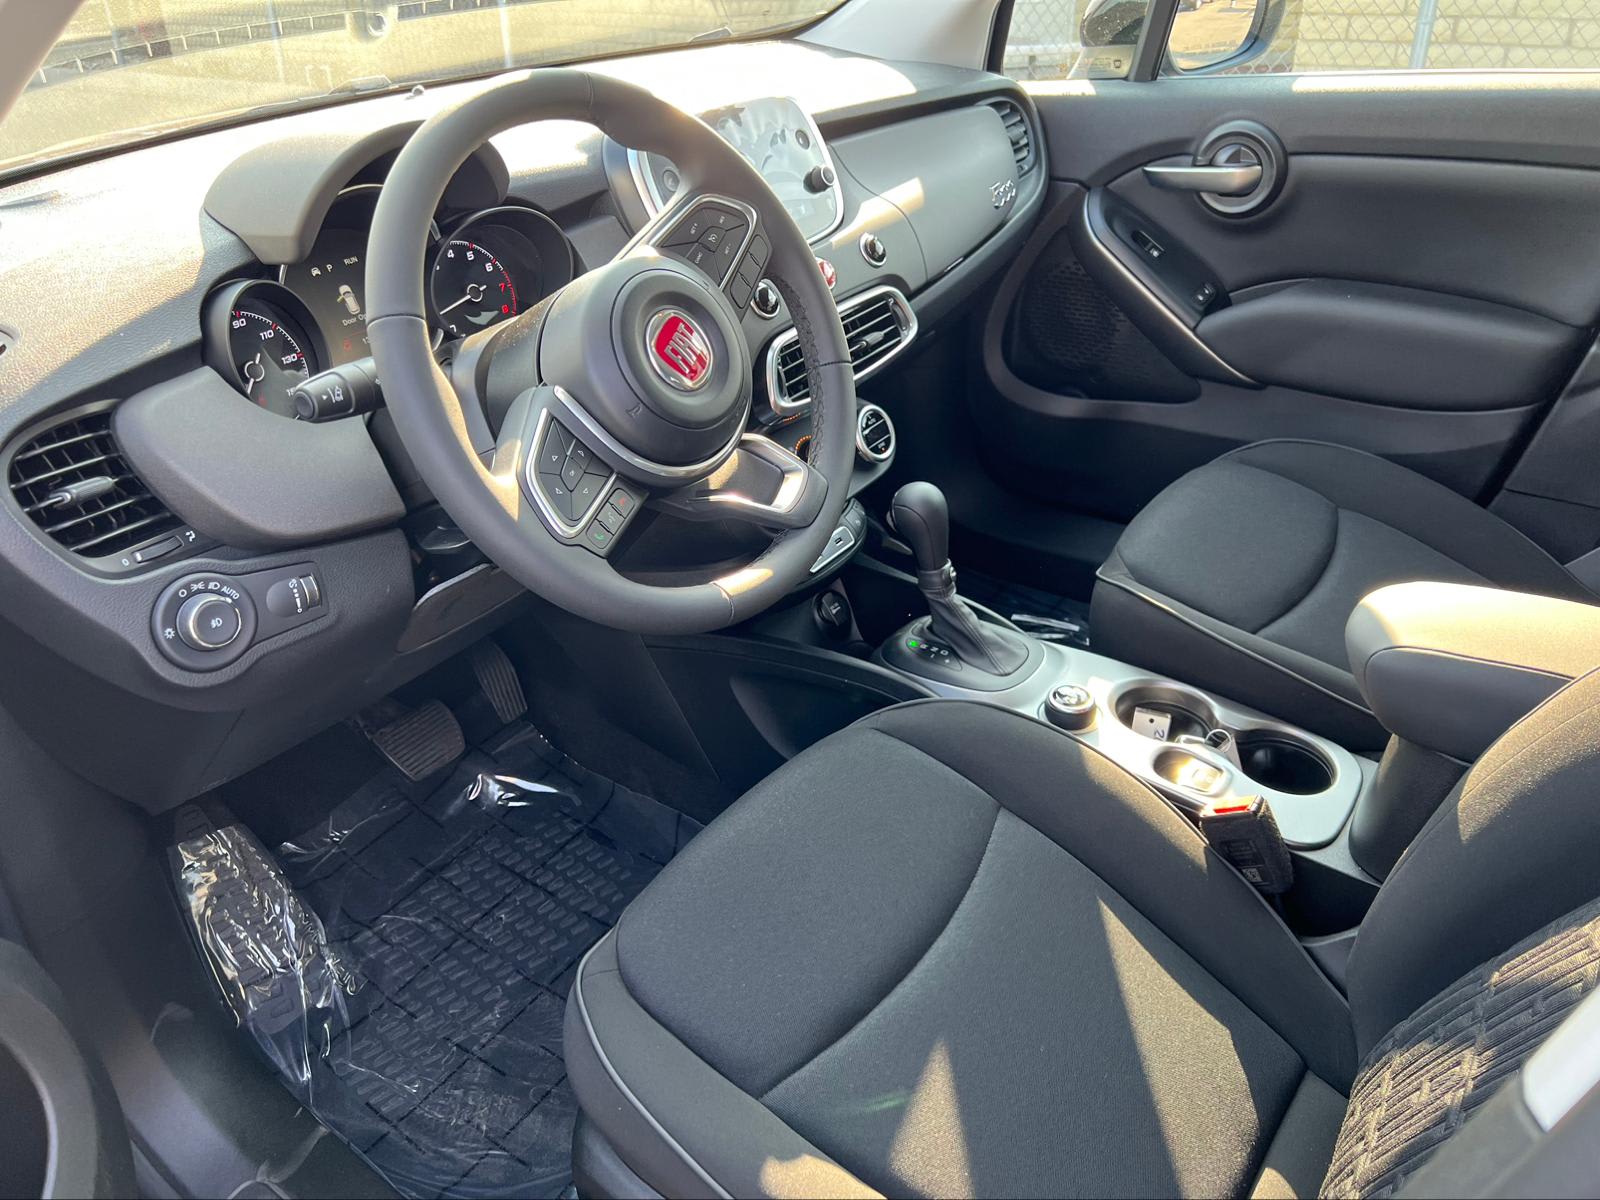 2023 FIAT® 500X Technology & Safety Features